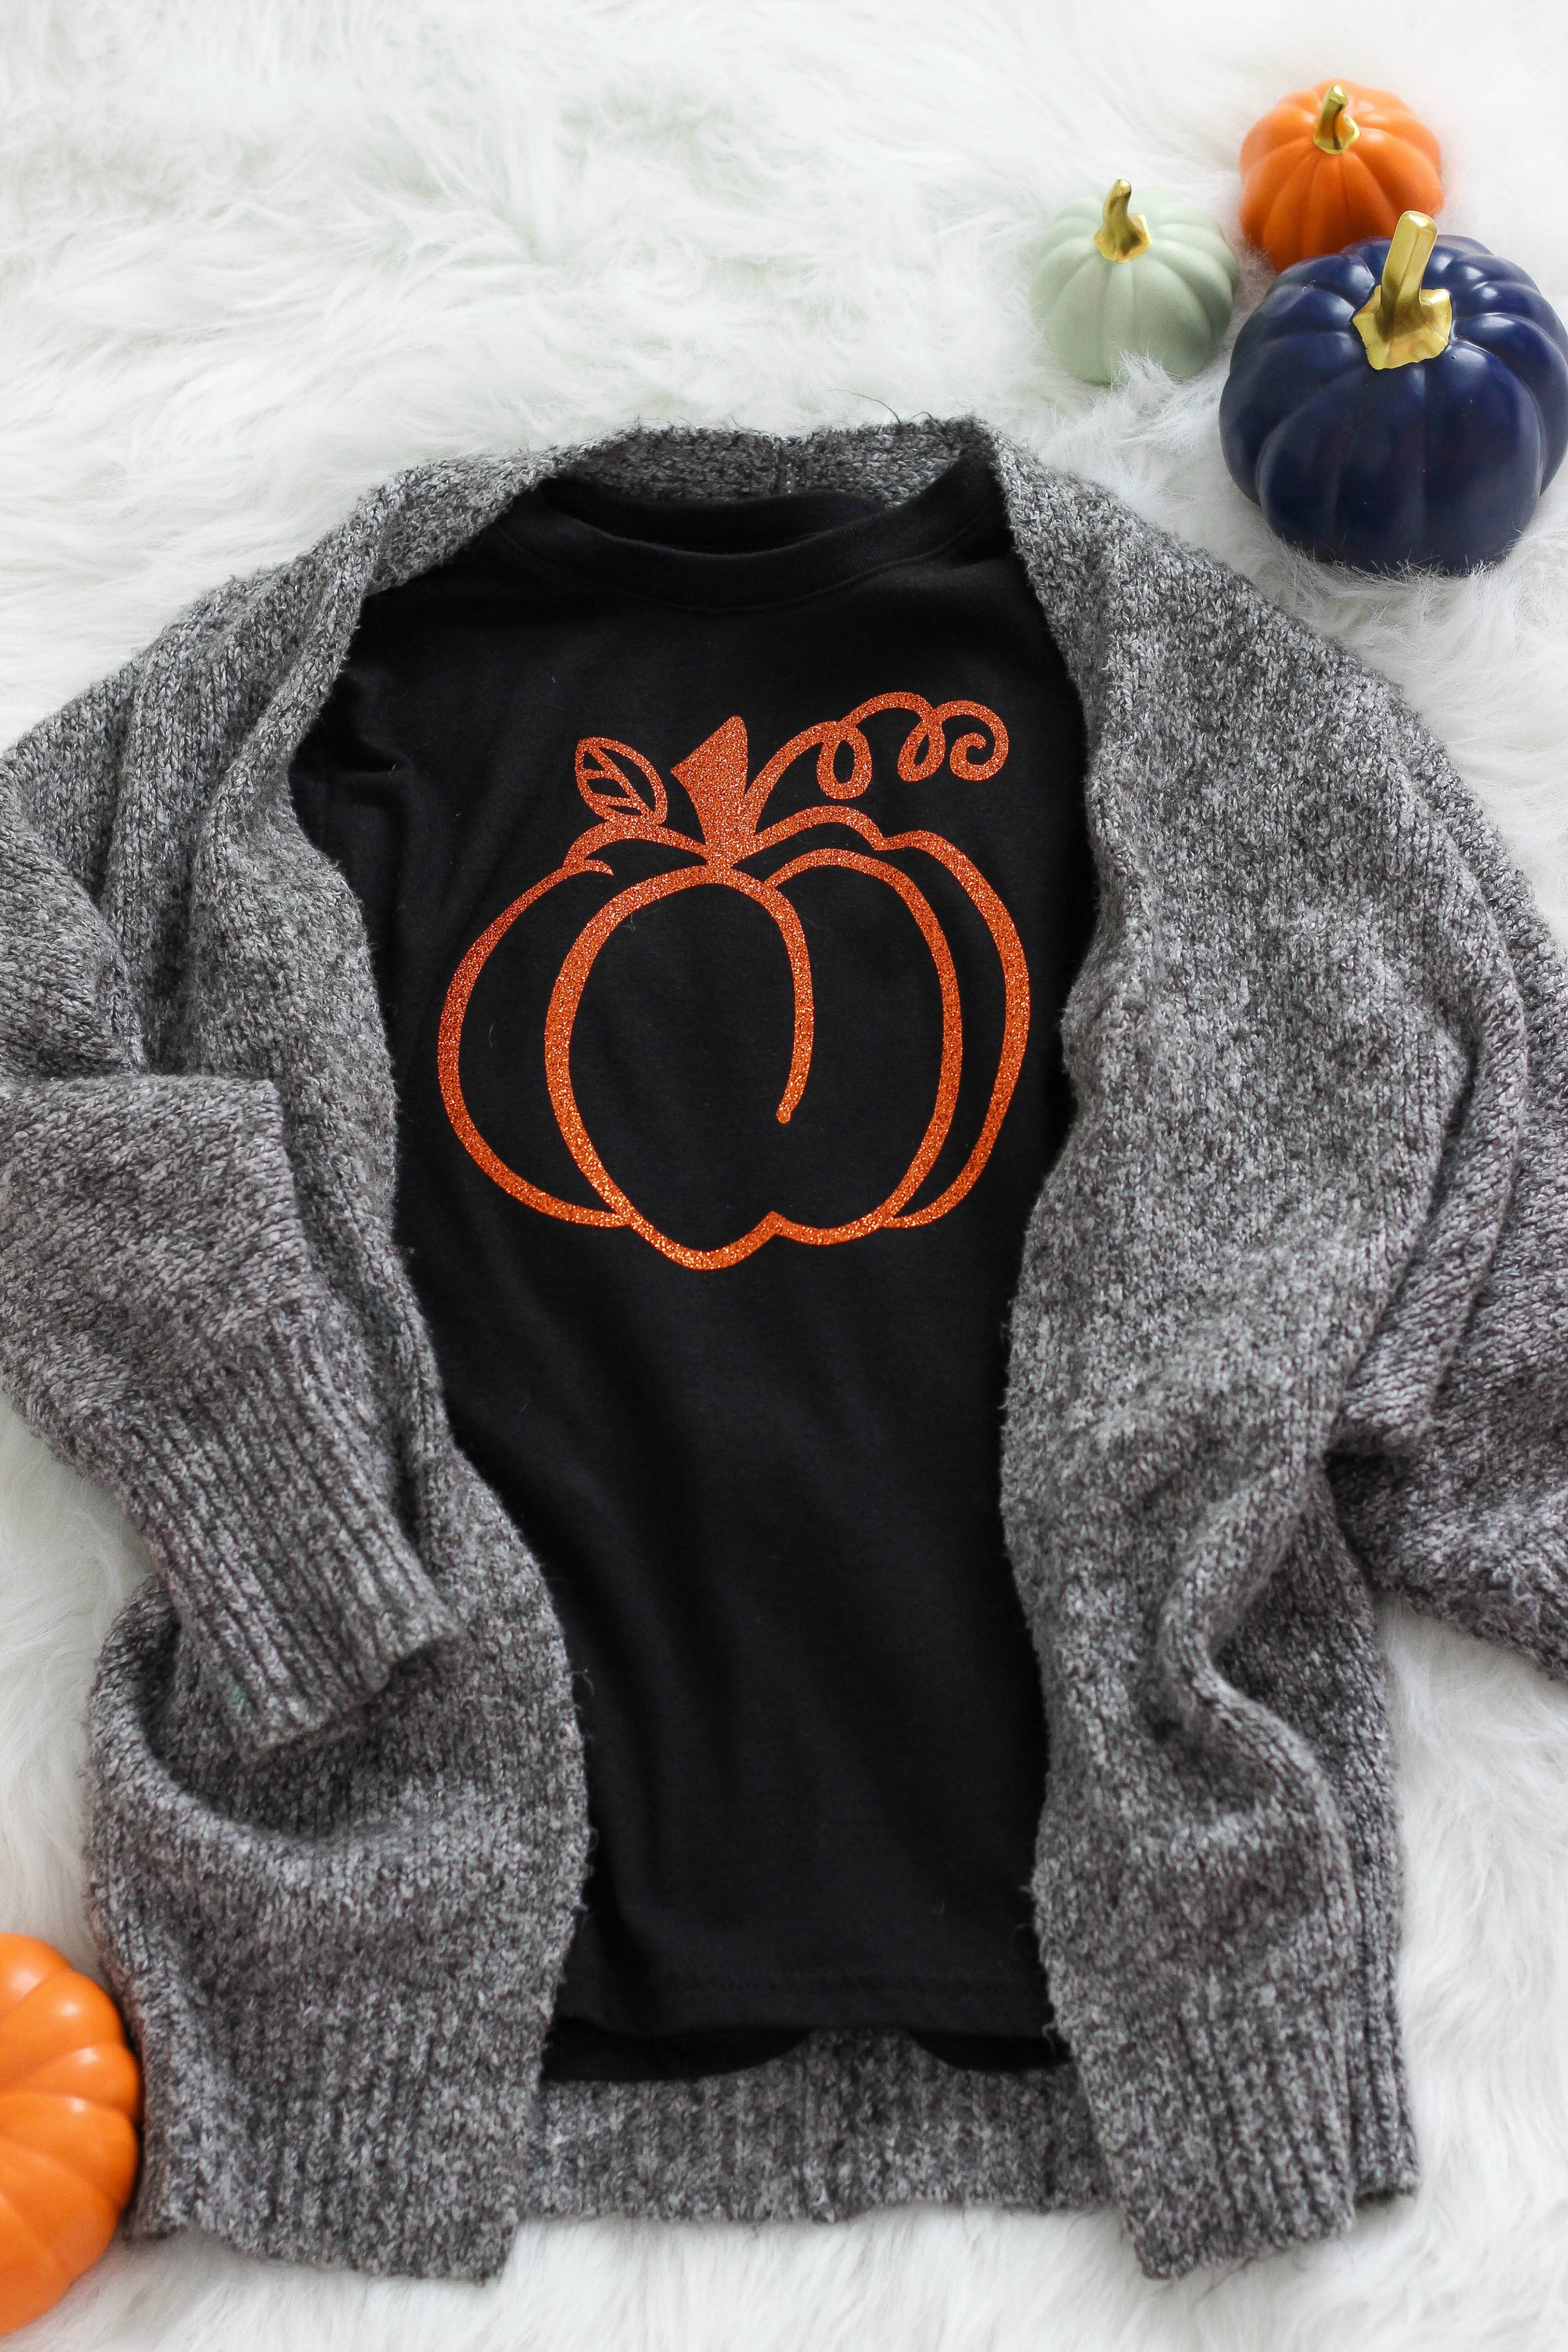 Pumpkin Iron-On Vinyl Shirt. Step by step instructions on how to make you own Halloween shirt!